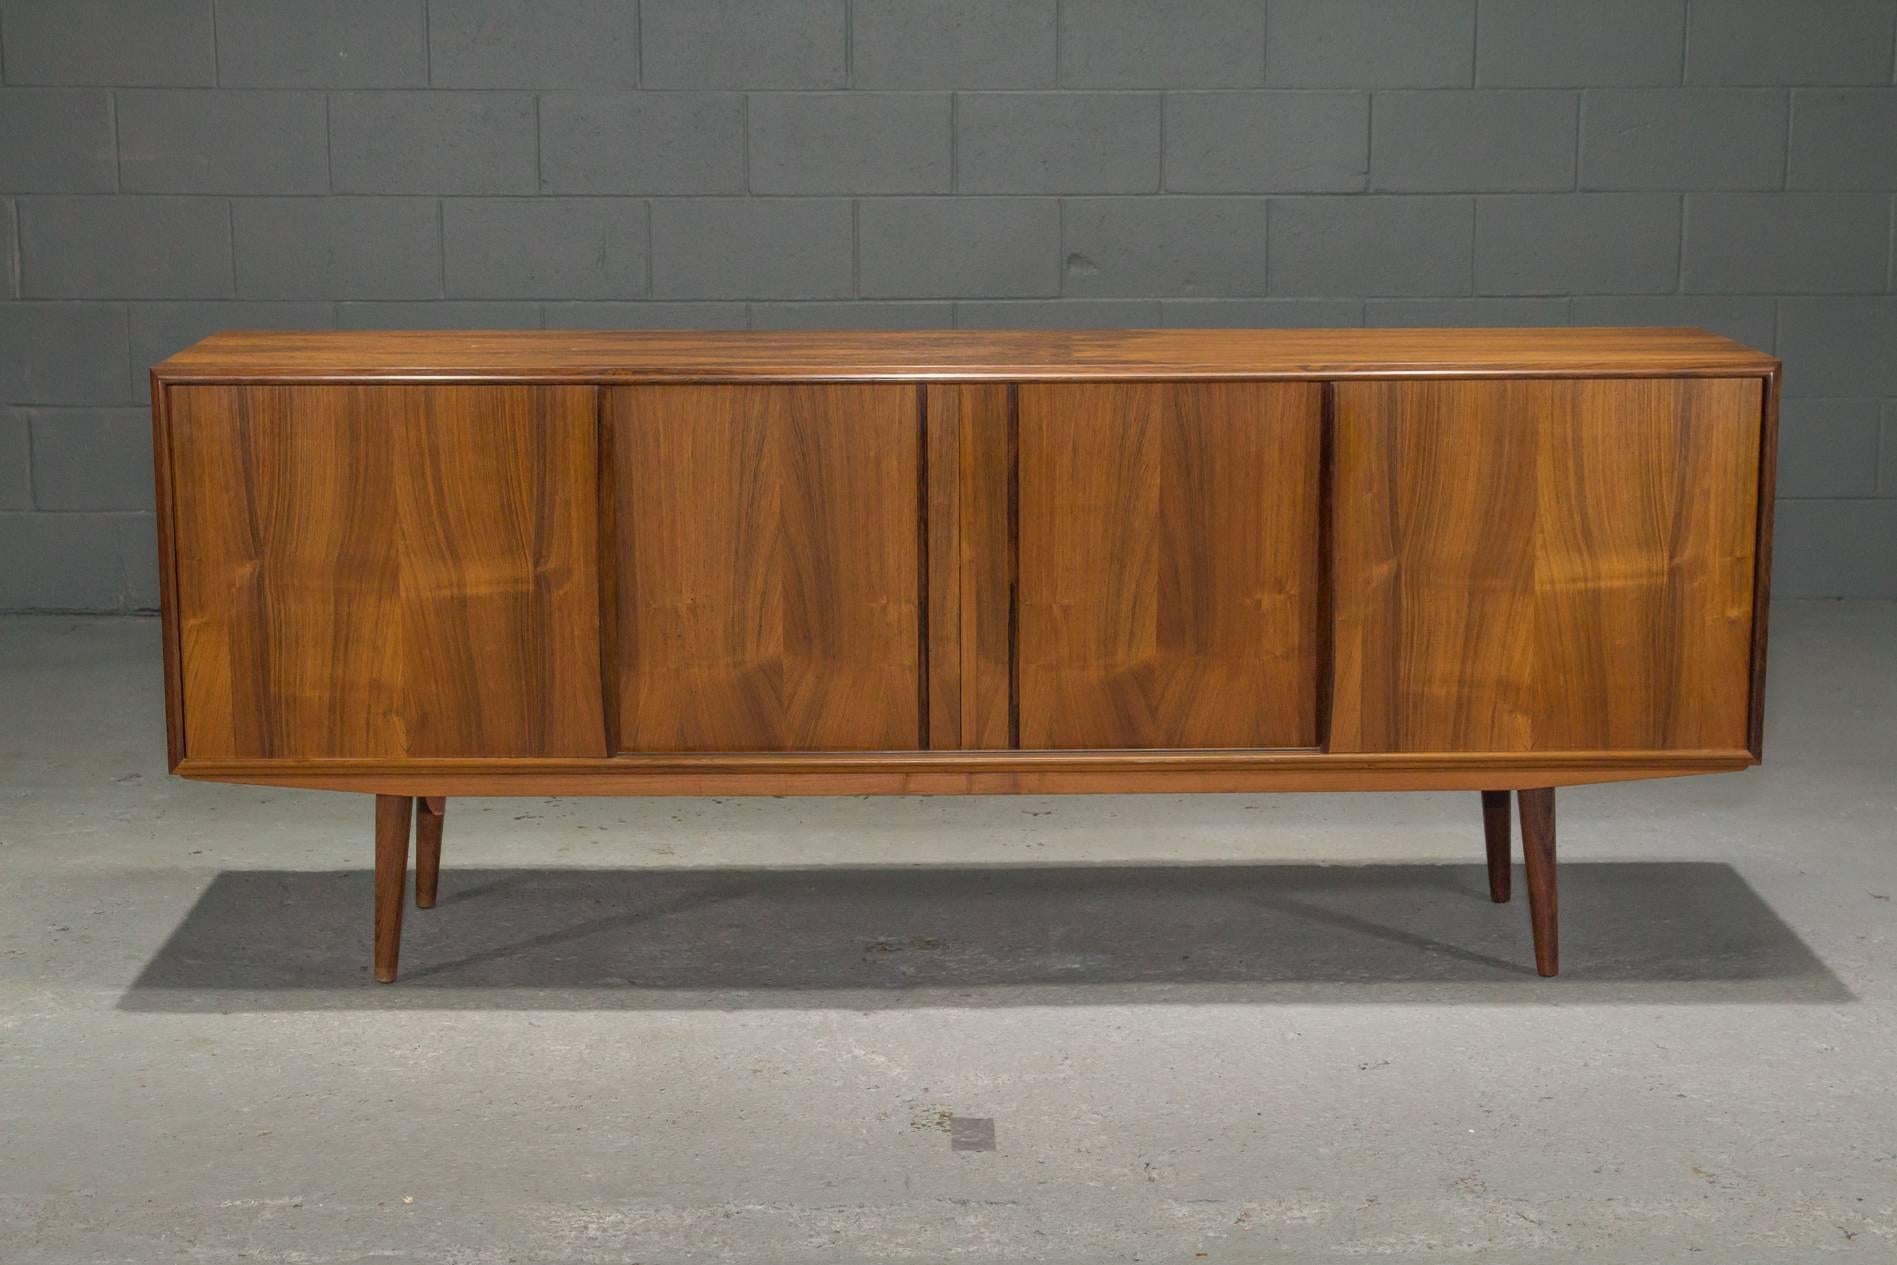 Danish Modern Rosewood SIdeboard. This sideboard features four sliding doors which open to reveal cutlery drawers on either side as well as an adjustable shelf on one side, and a larger adjustable shelf in the middle. 